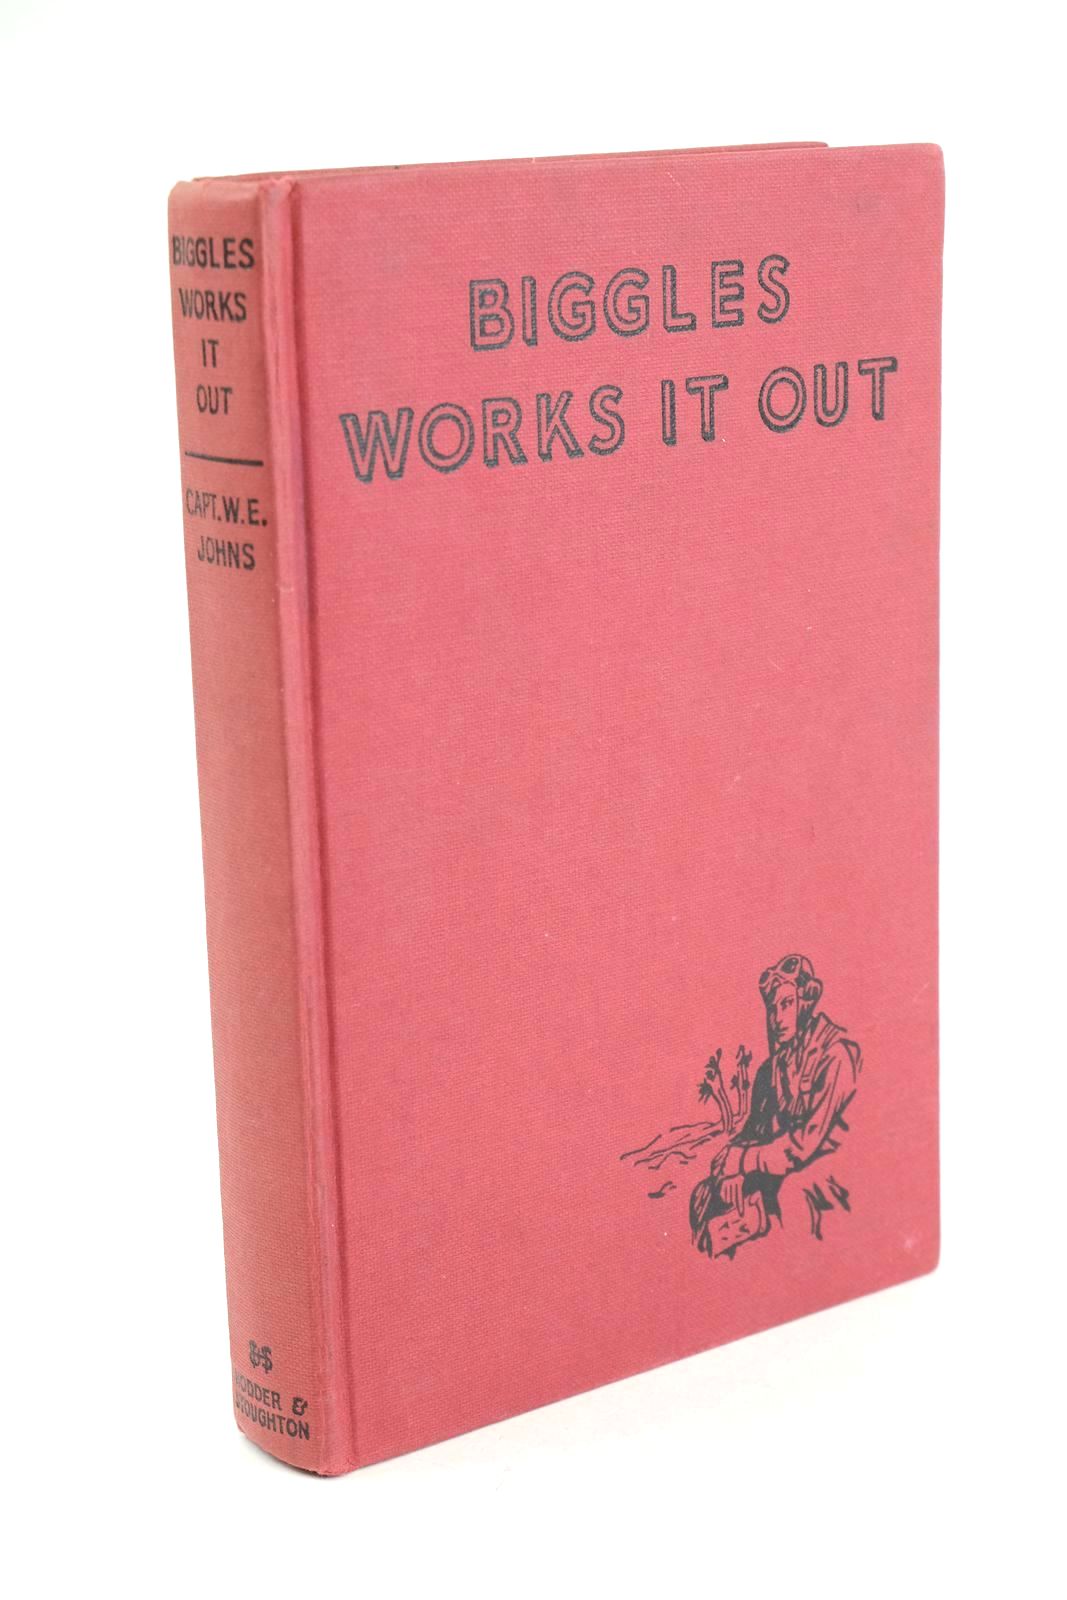 Photo of BIGGLES WORKS IT OUT written by Johns, W.E. illustrated by Stead,  published by Hodder & Stoughton (STOCK CODE: 1324858)  for sale by Stella & Rose's Books